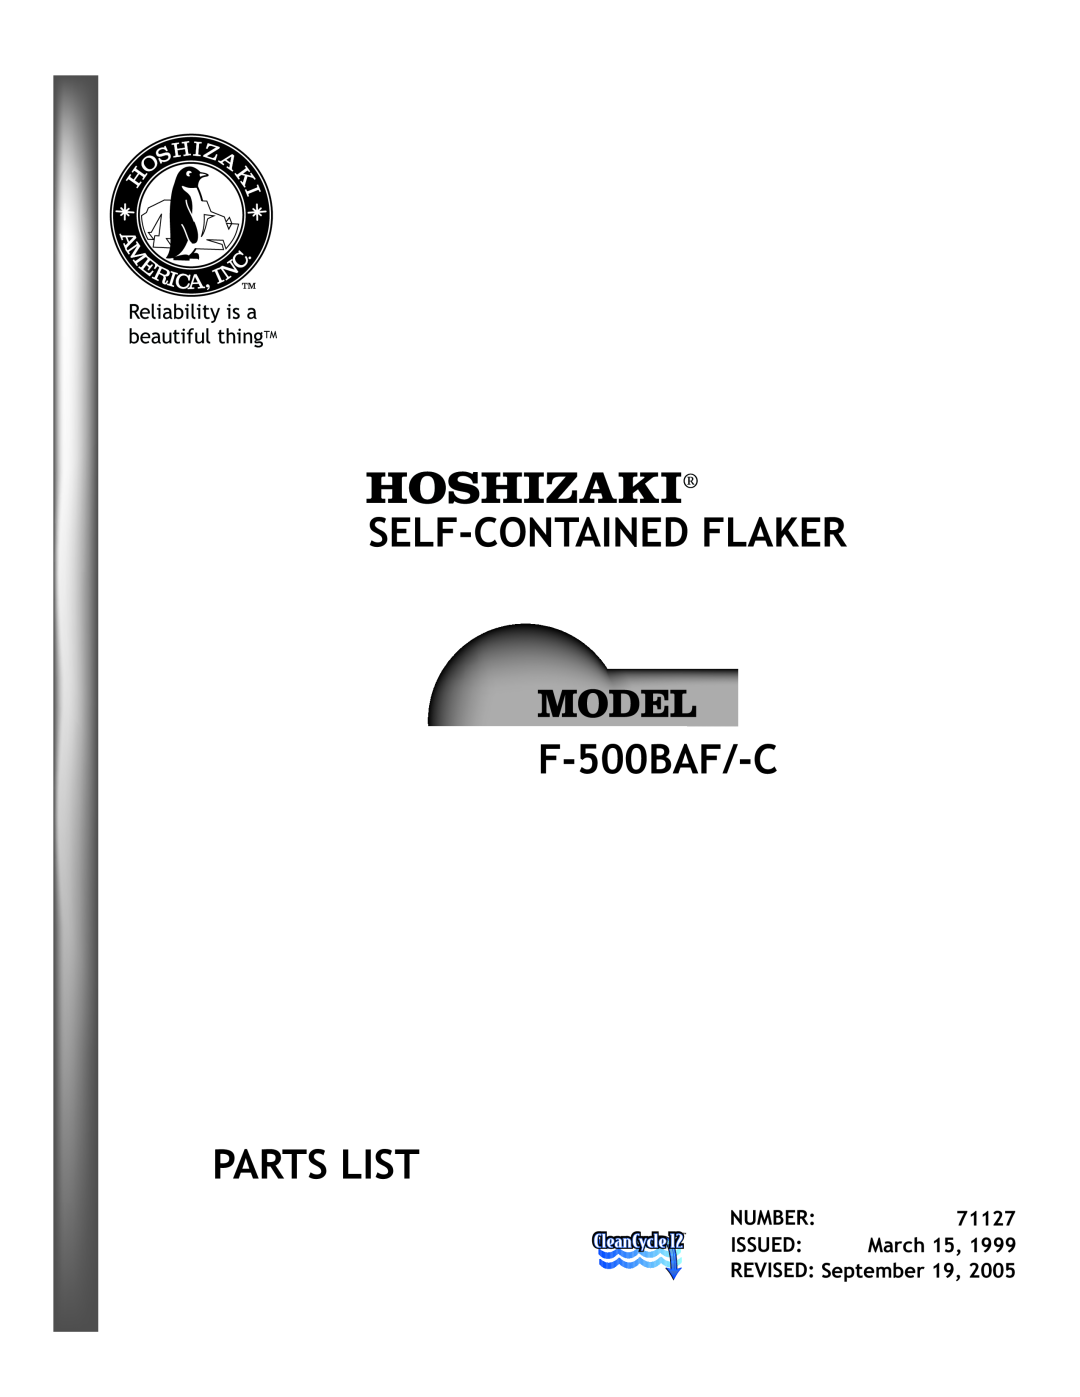 Hoshizaki manual SELF-CONTAINEDFLAKER F-500BAF/-C PARTS LIST, Reliability is a beautiful thingTM, REVISED September 